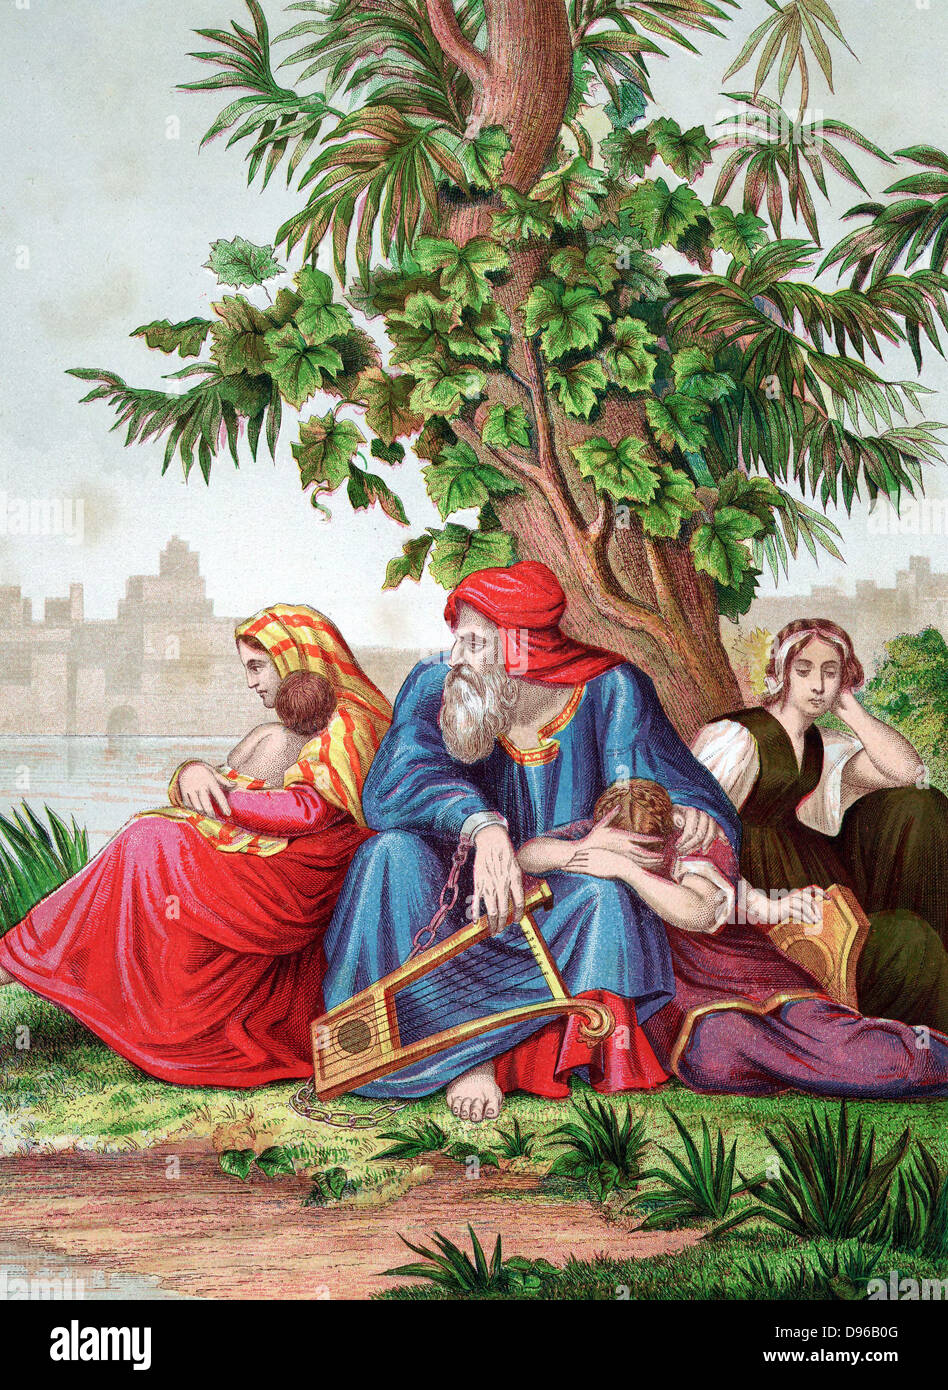 Constancy of the Jews in captivity. 'By the rivers of Babylon, there we sat down, yea, we wept when we remembered Zion'. 'Bible': Psalm 137. Chromolithograph c1860. Jews made captive in Babylon by king Nebuchadnezzar (Nebuchadrezzar) 597 BC until released Stock Photo